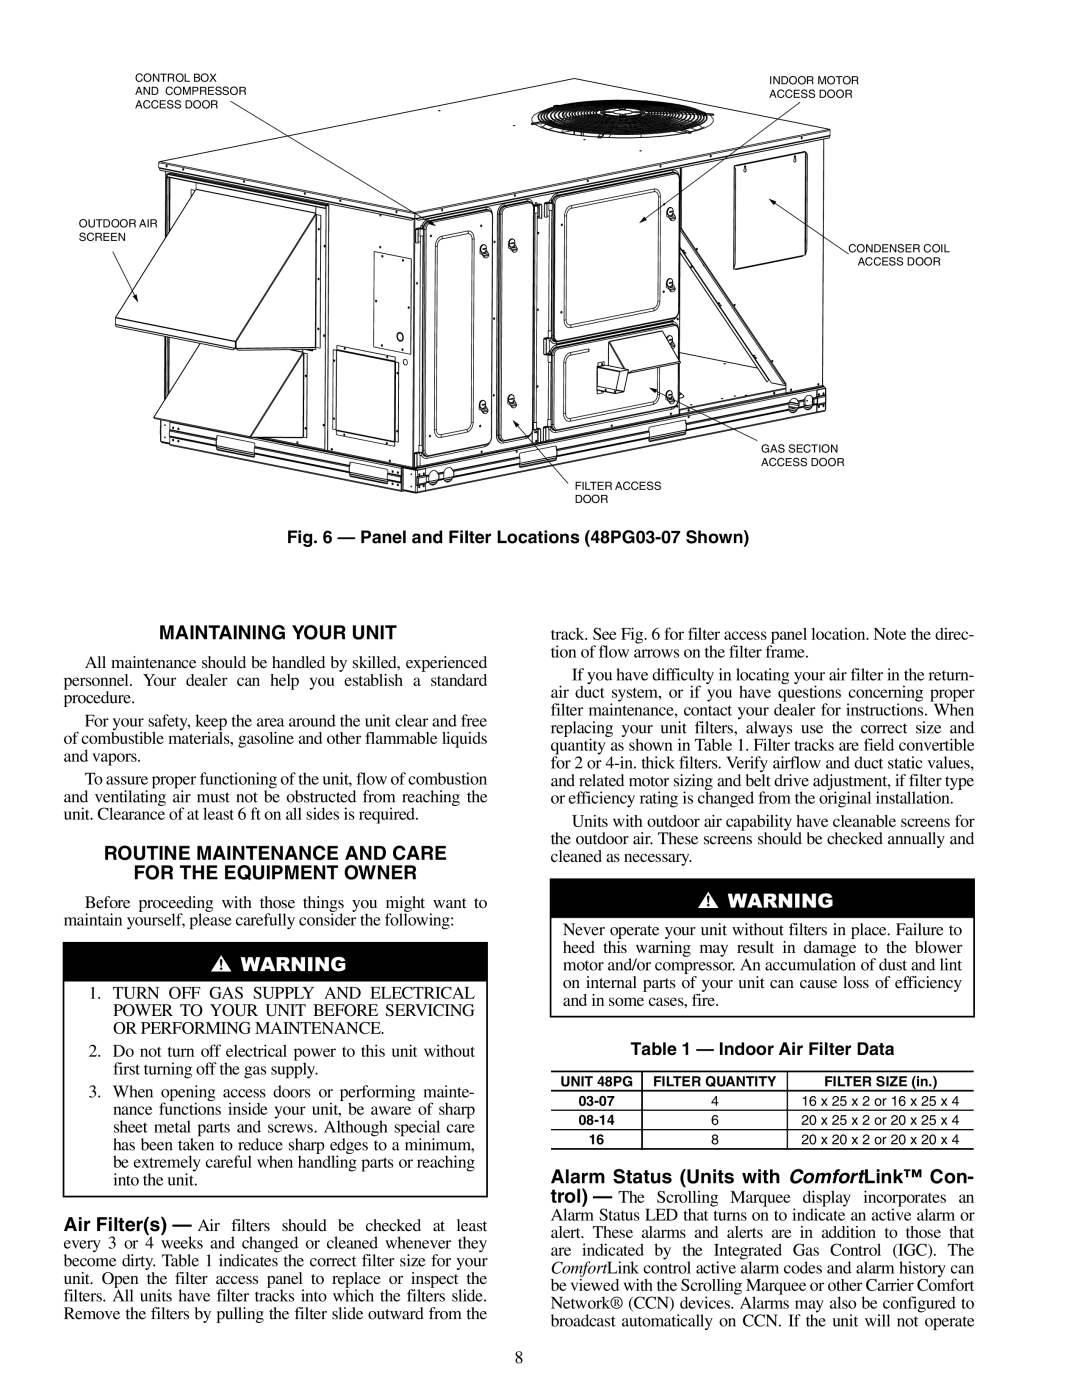 Carrier 48PG03---16 Maintaining Your Unit, Routine Maintenance And Care, For The Equipment Owner, Indoor Air Filter Data 